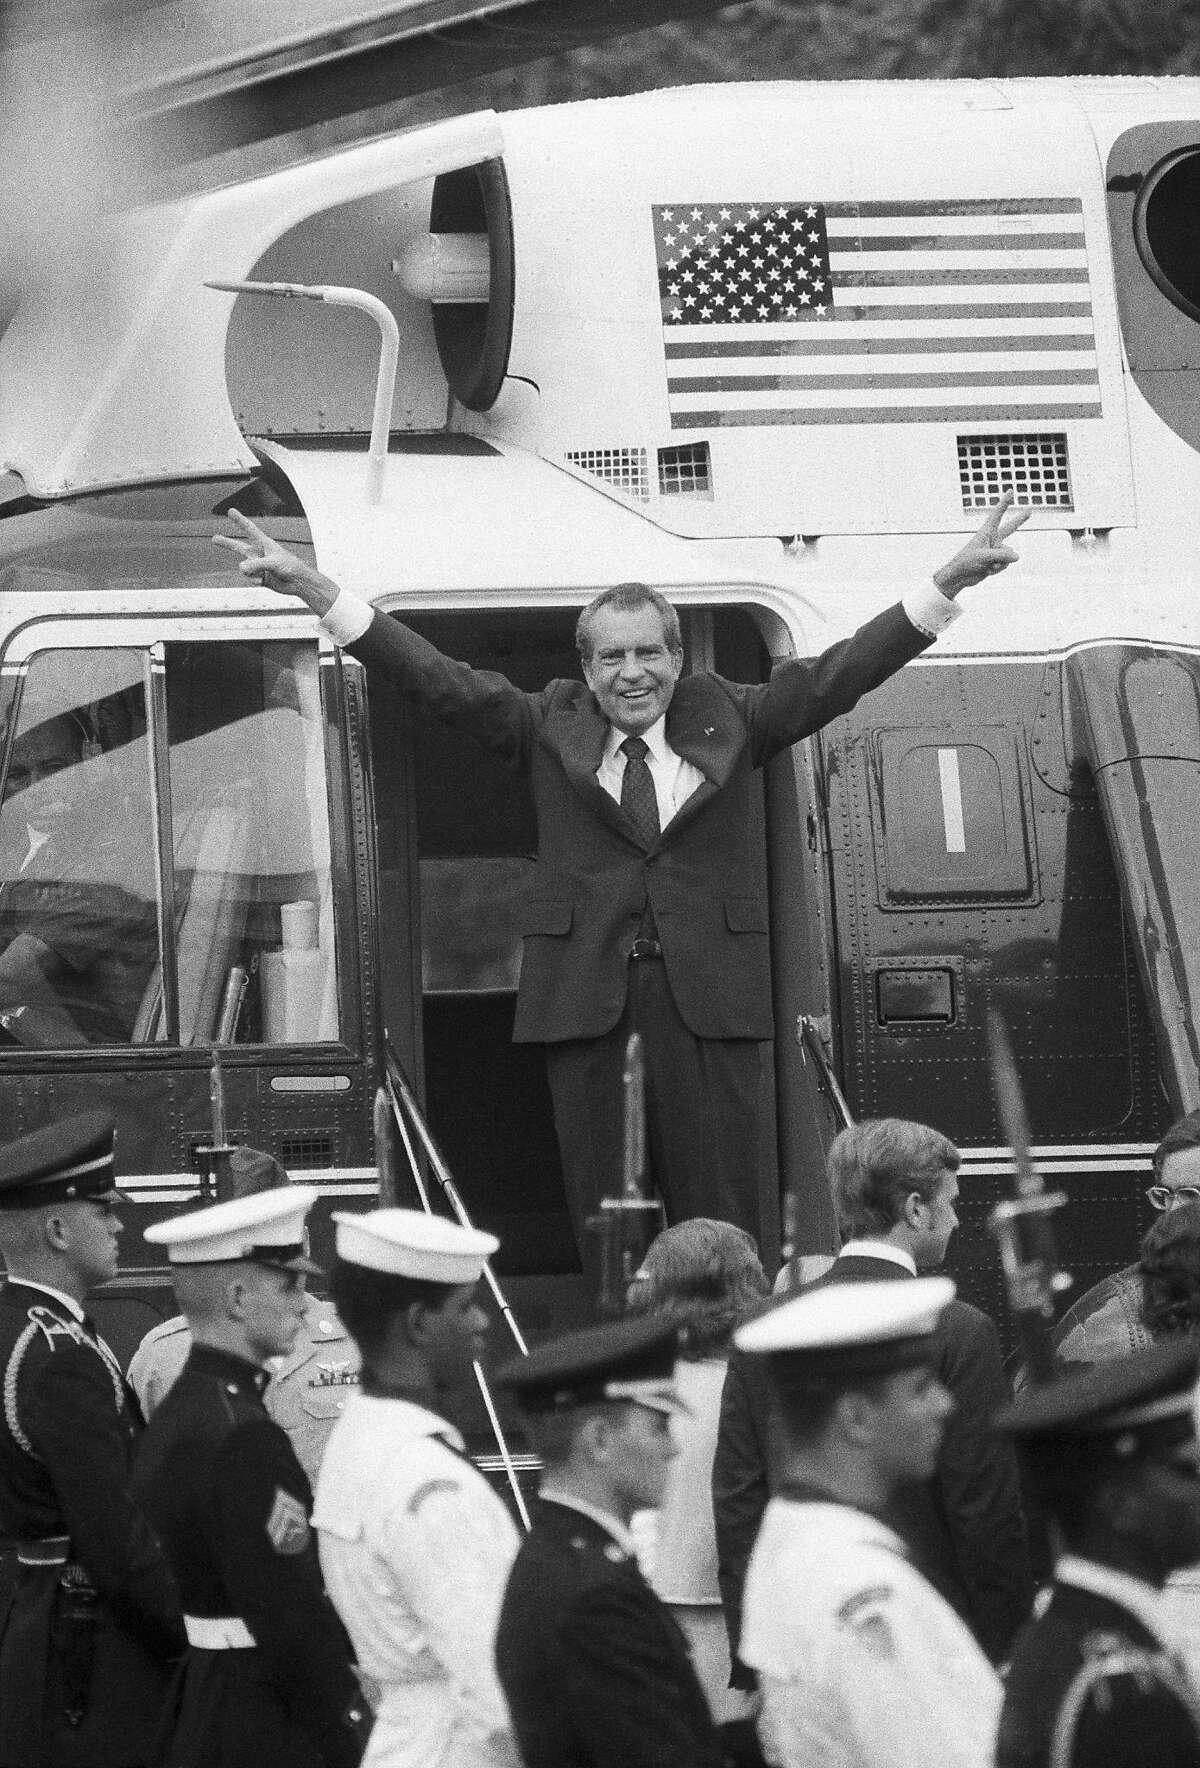 President Nixon gives his famous wave from the steps of Marine One after his resignation as President of the United States.